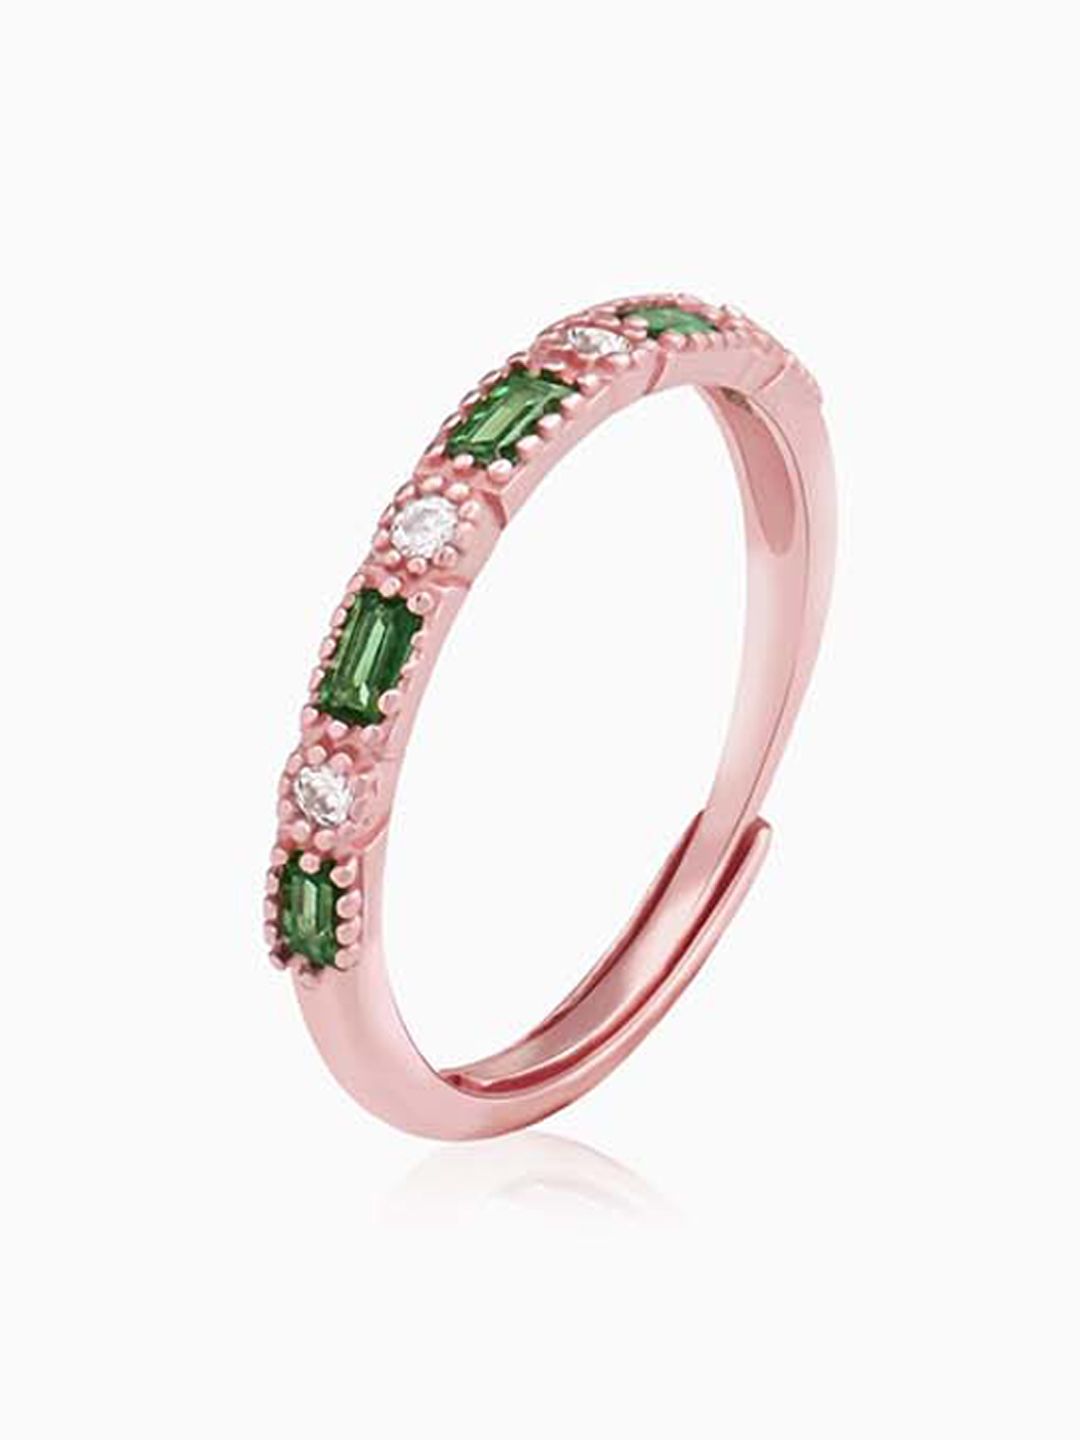 GIVA Women Rose Gold-Plated White & Green CZ-Studded Adjustable Finger Ring Price in India